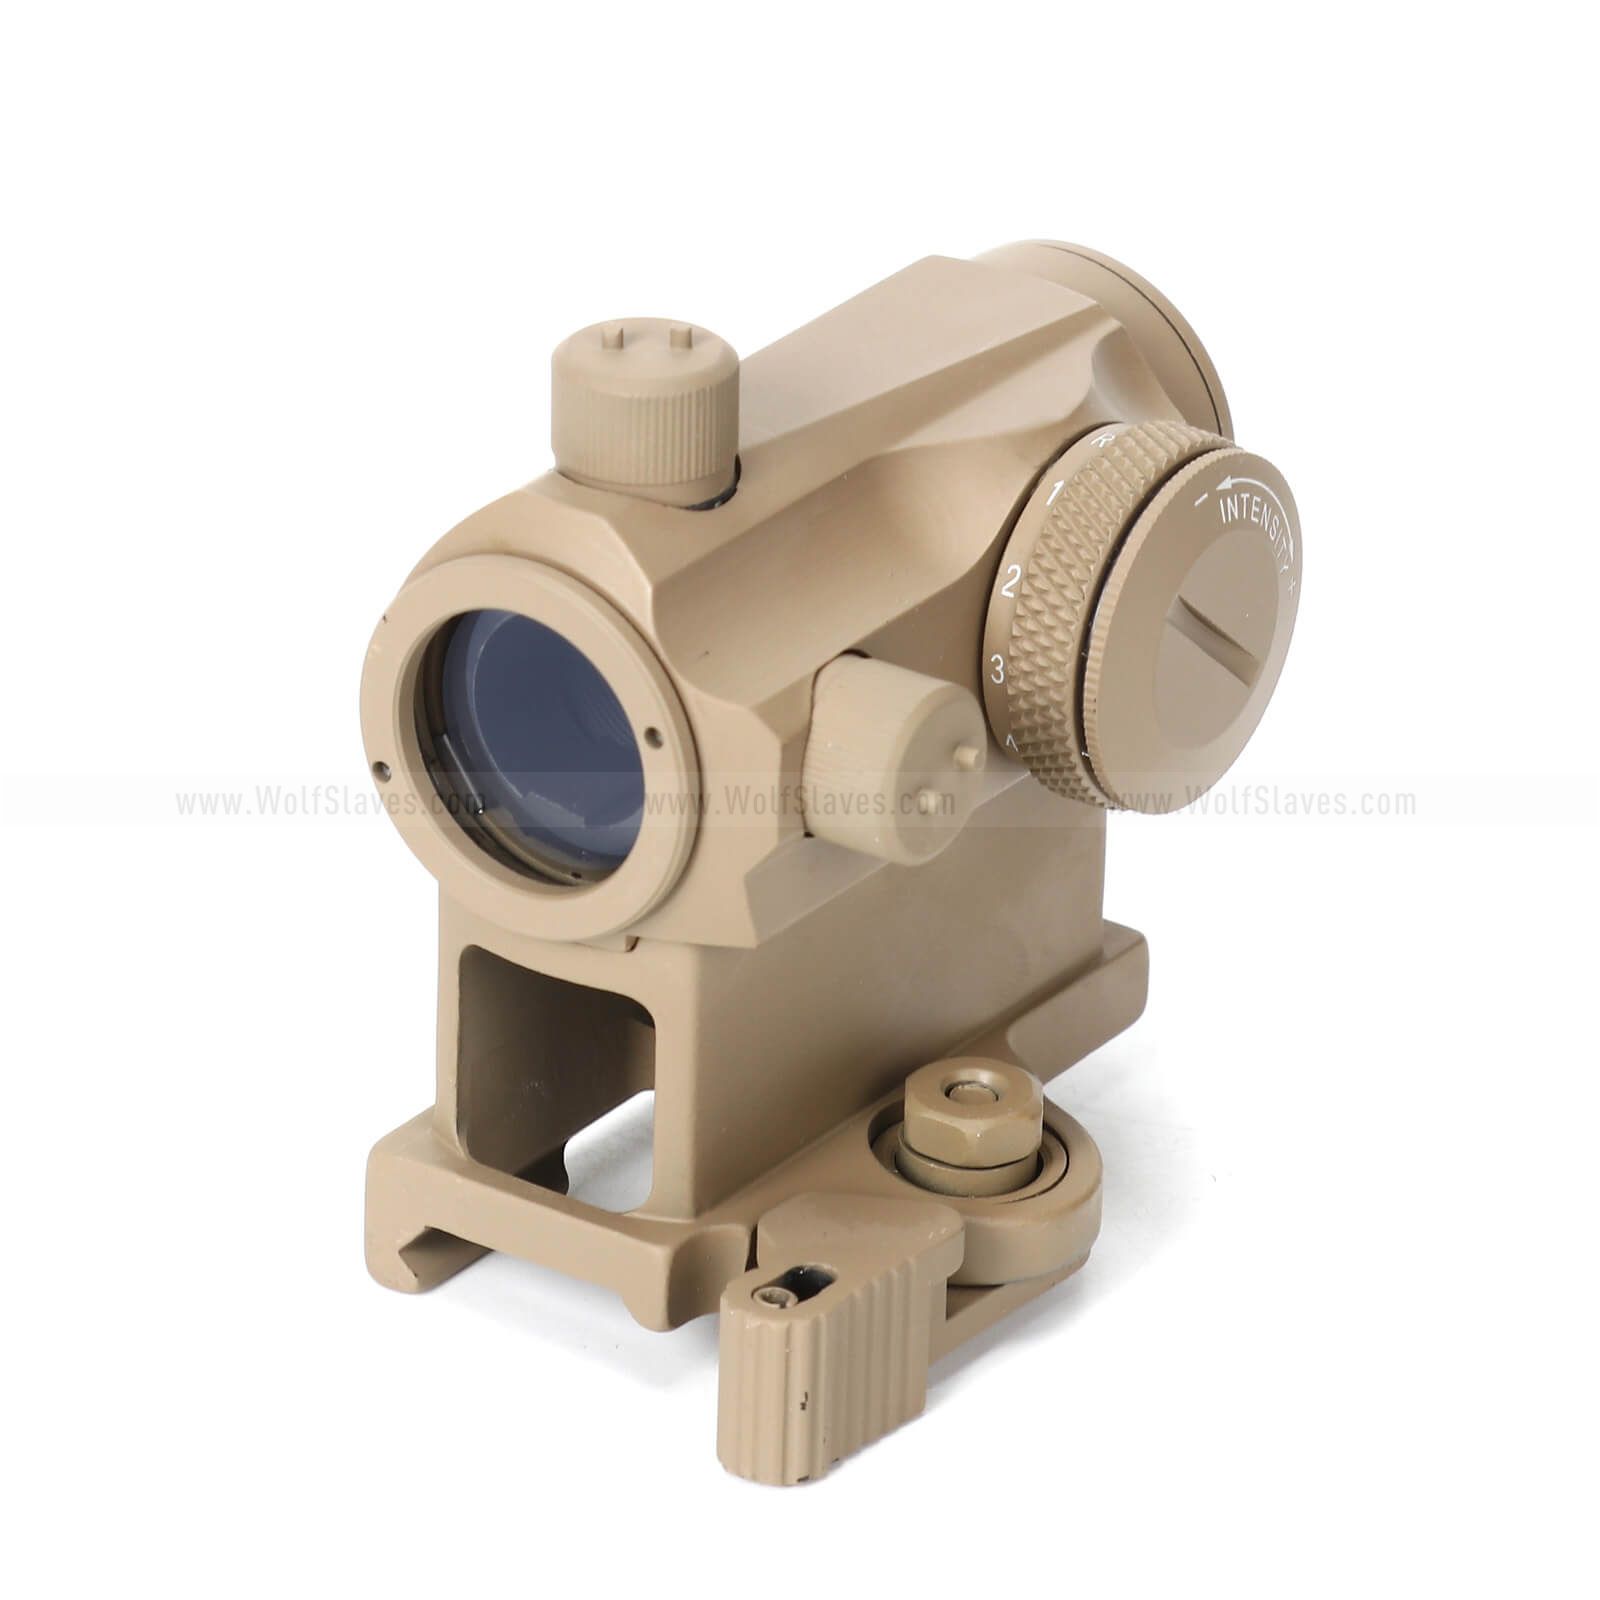 Airsoft 20mm Rail Scope Sight New A track for mounting the s1ght.Outdoor sport .hunt1ng Expansion. Outdoor tact1cal CNC Picatinny .for red d0t sc0pe